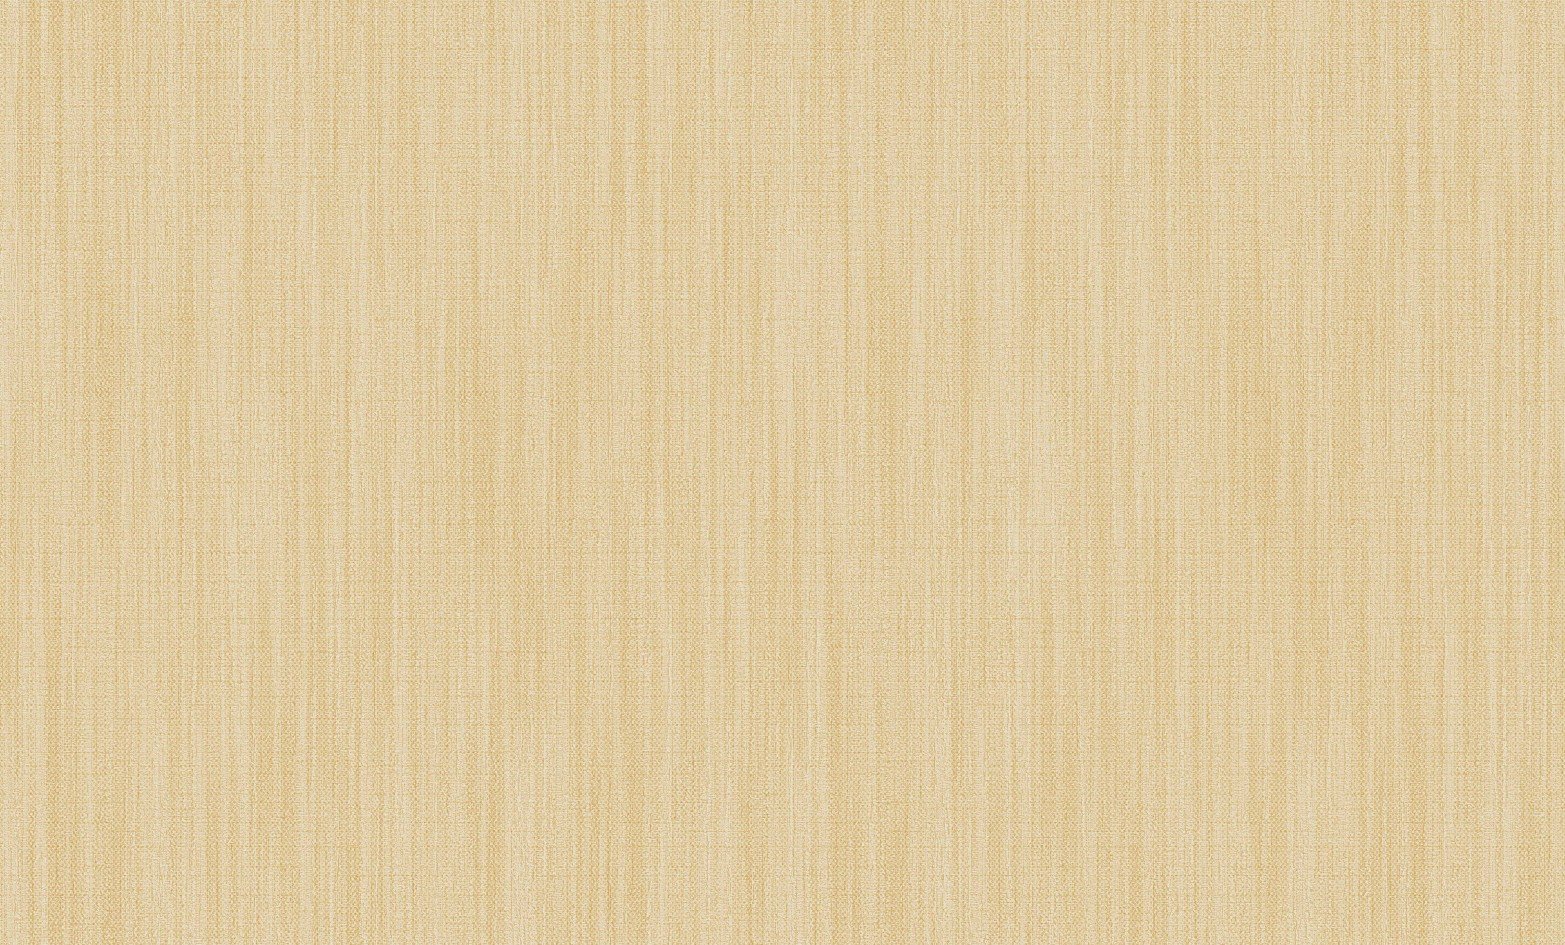 Gloria Plain Colour Wallpaper Beige YG30205 Finishing, Wallpaper Gloria Plain Colour Wallpaper Beige YG30205 Online at Low Price Only on BuildNext.in